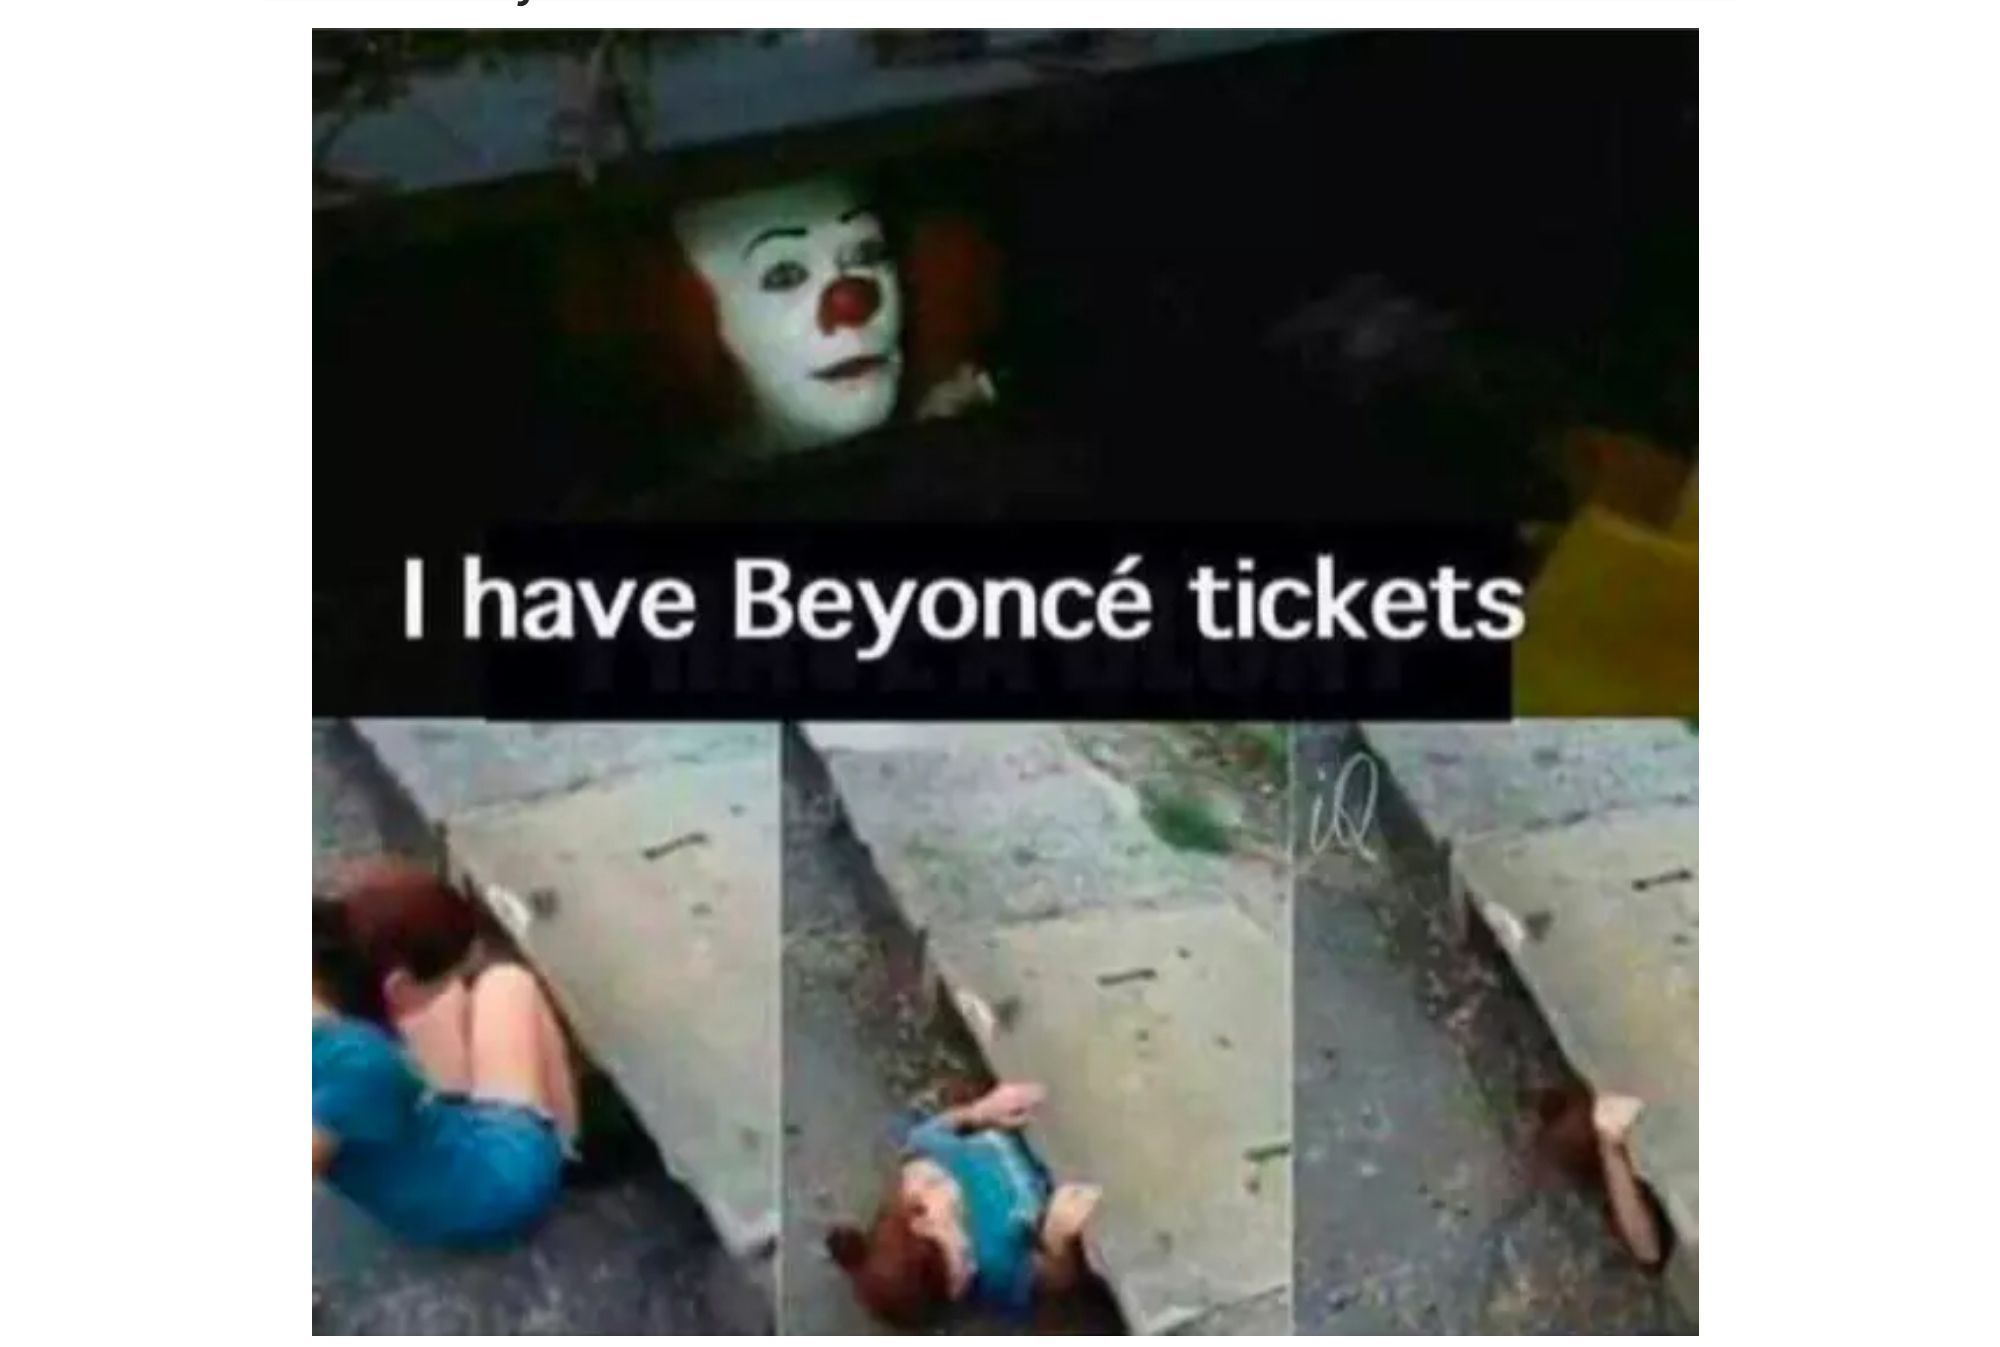 IT 10 Movie Memes That Will Have You Dying Of Laughter